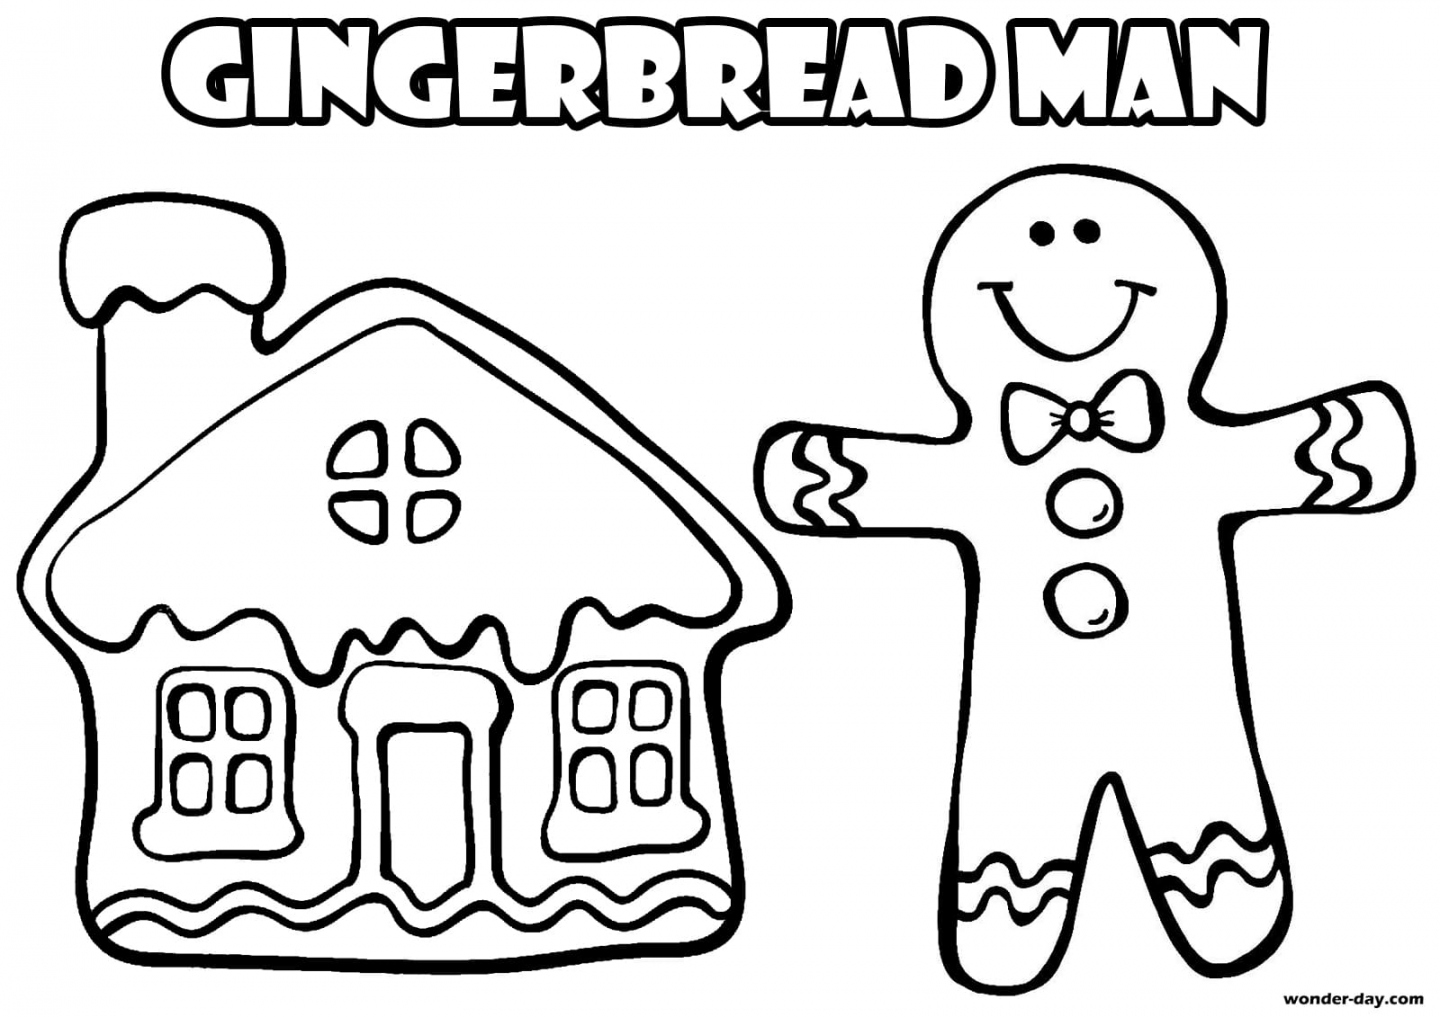 Gingerbread Man coloring pages - Gingerbread Man To Color